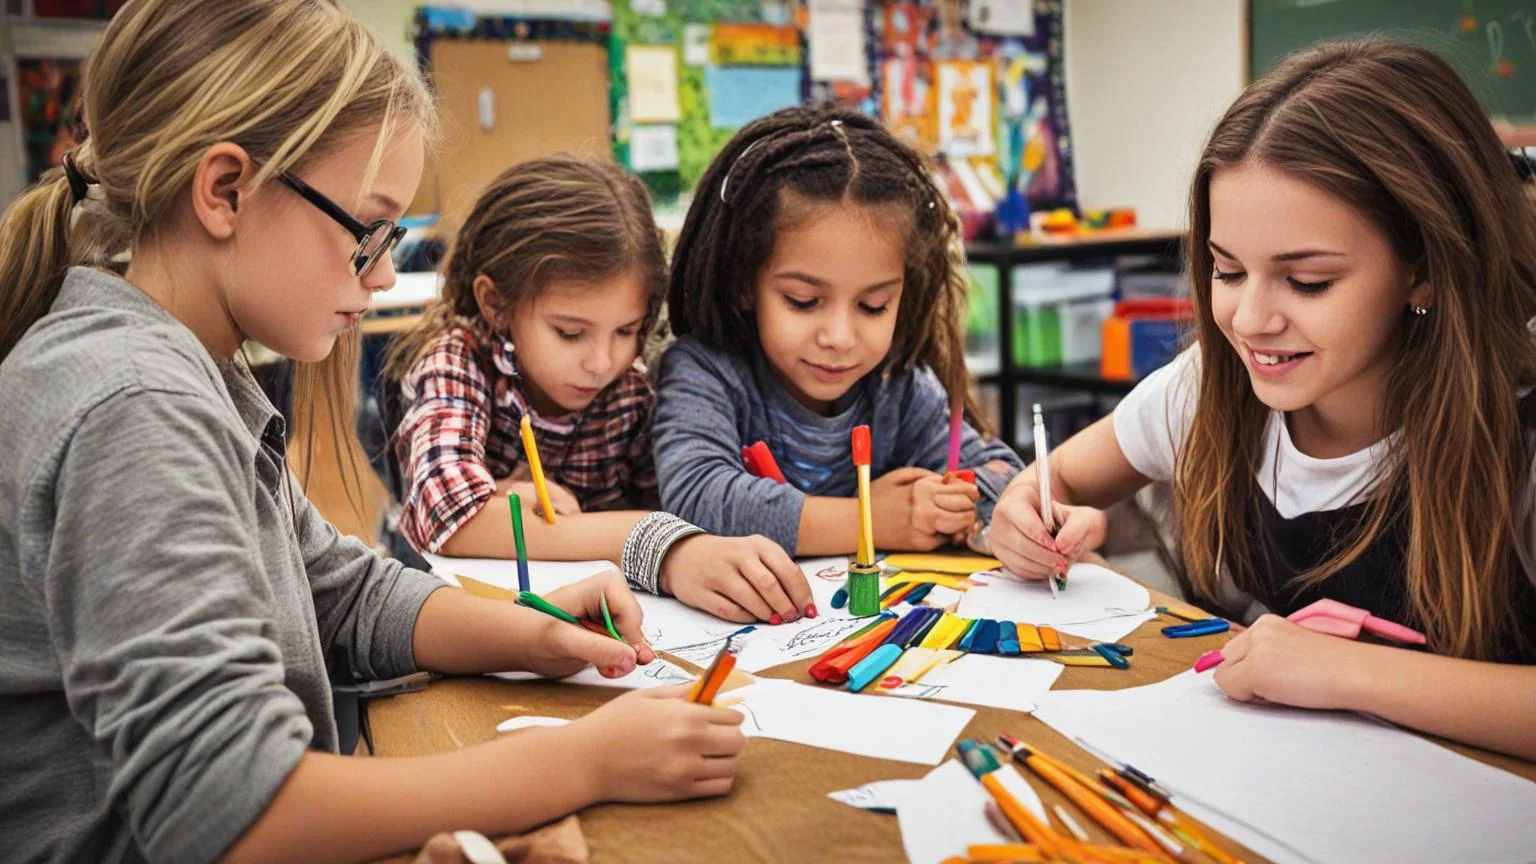 How to Foster Creativity in the Classroom